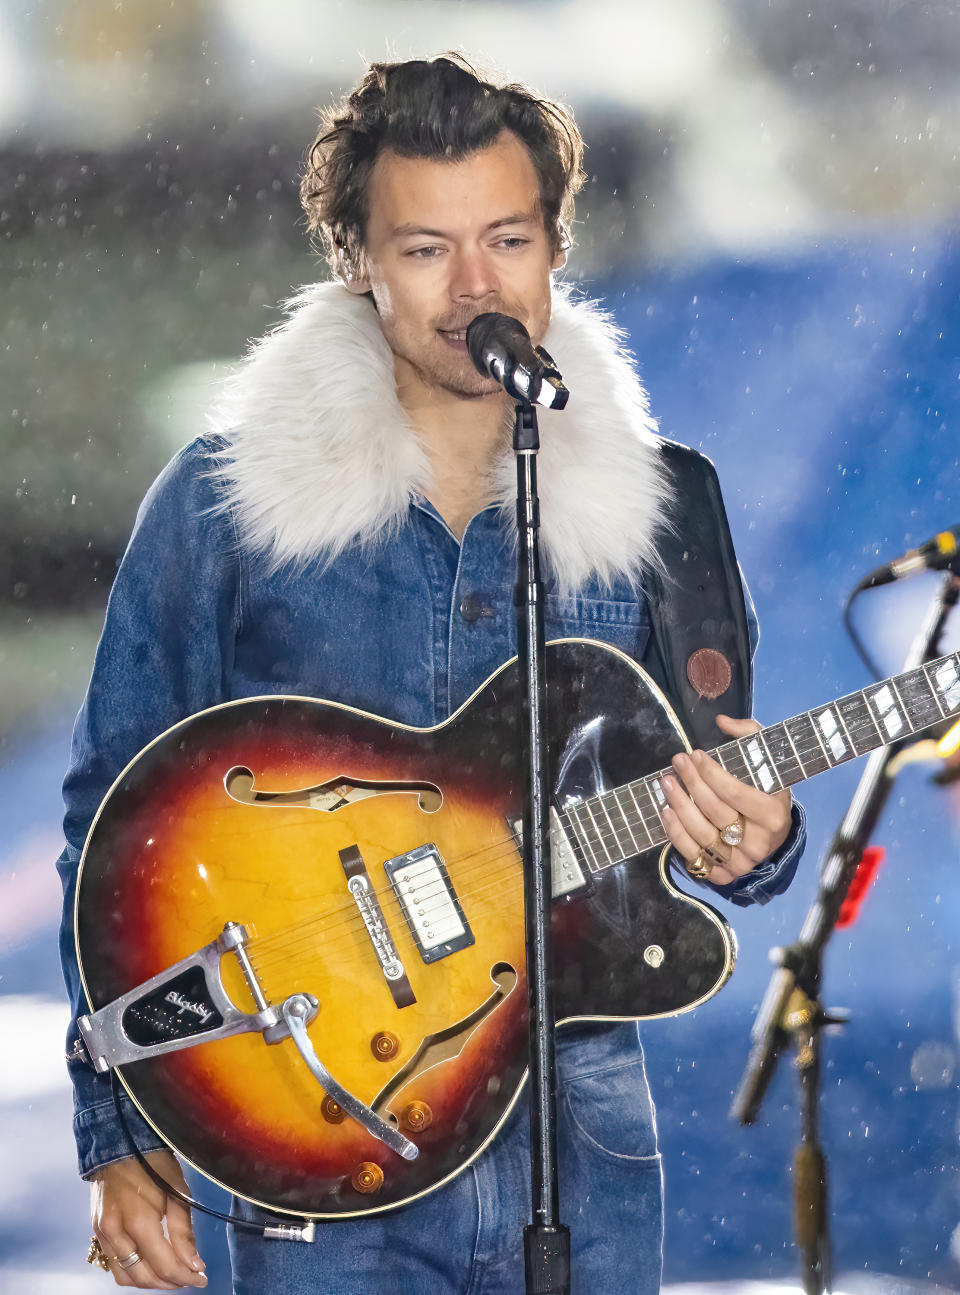 <p> In the ever-growing catalogue of Harry Styles&apos; epic fashion moments is the performer&apos;s appearance on <em>TODAY&apos;s</em>&#xA0;Citi Summer Concert&#xA0;Series on May 19, ahead of the release of<em> Harry&apos;s House</em>.&#xA0; </p> <p> Styles wore a candy-striped neon onesie to perform songs off the new record for fans during the televised show, but it&apos;s actually the outfit that he wore during <em>soundcheck</em> that caught our attention. Equal parts Penny Lane and Canadian tuxedo, the doubled-down denim look from AMI saw the singer gamely play with proportion, with a cropped jacket and low-rise jeans allowing his many tattoos to peek out. A new era of Styles&apos; style has arrived! </p>